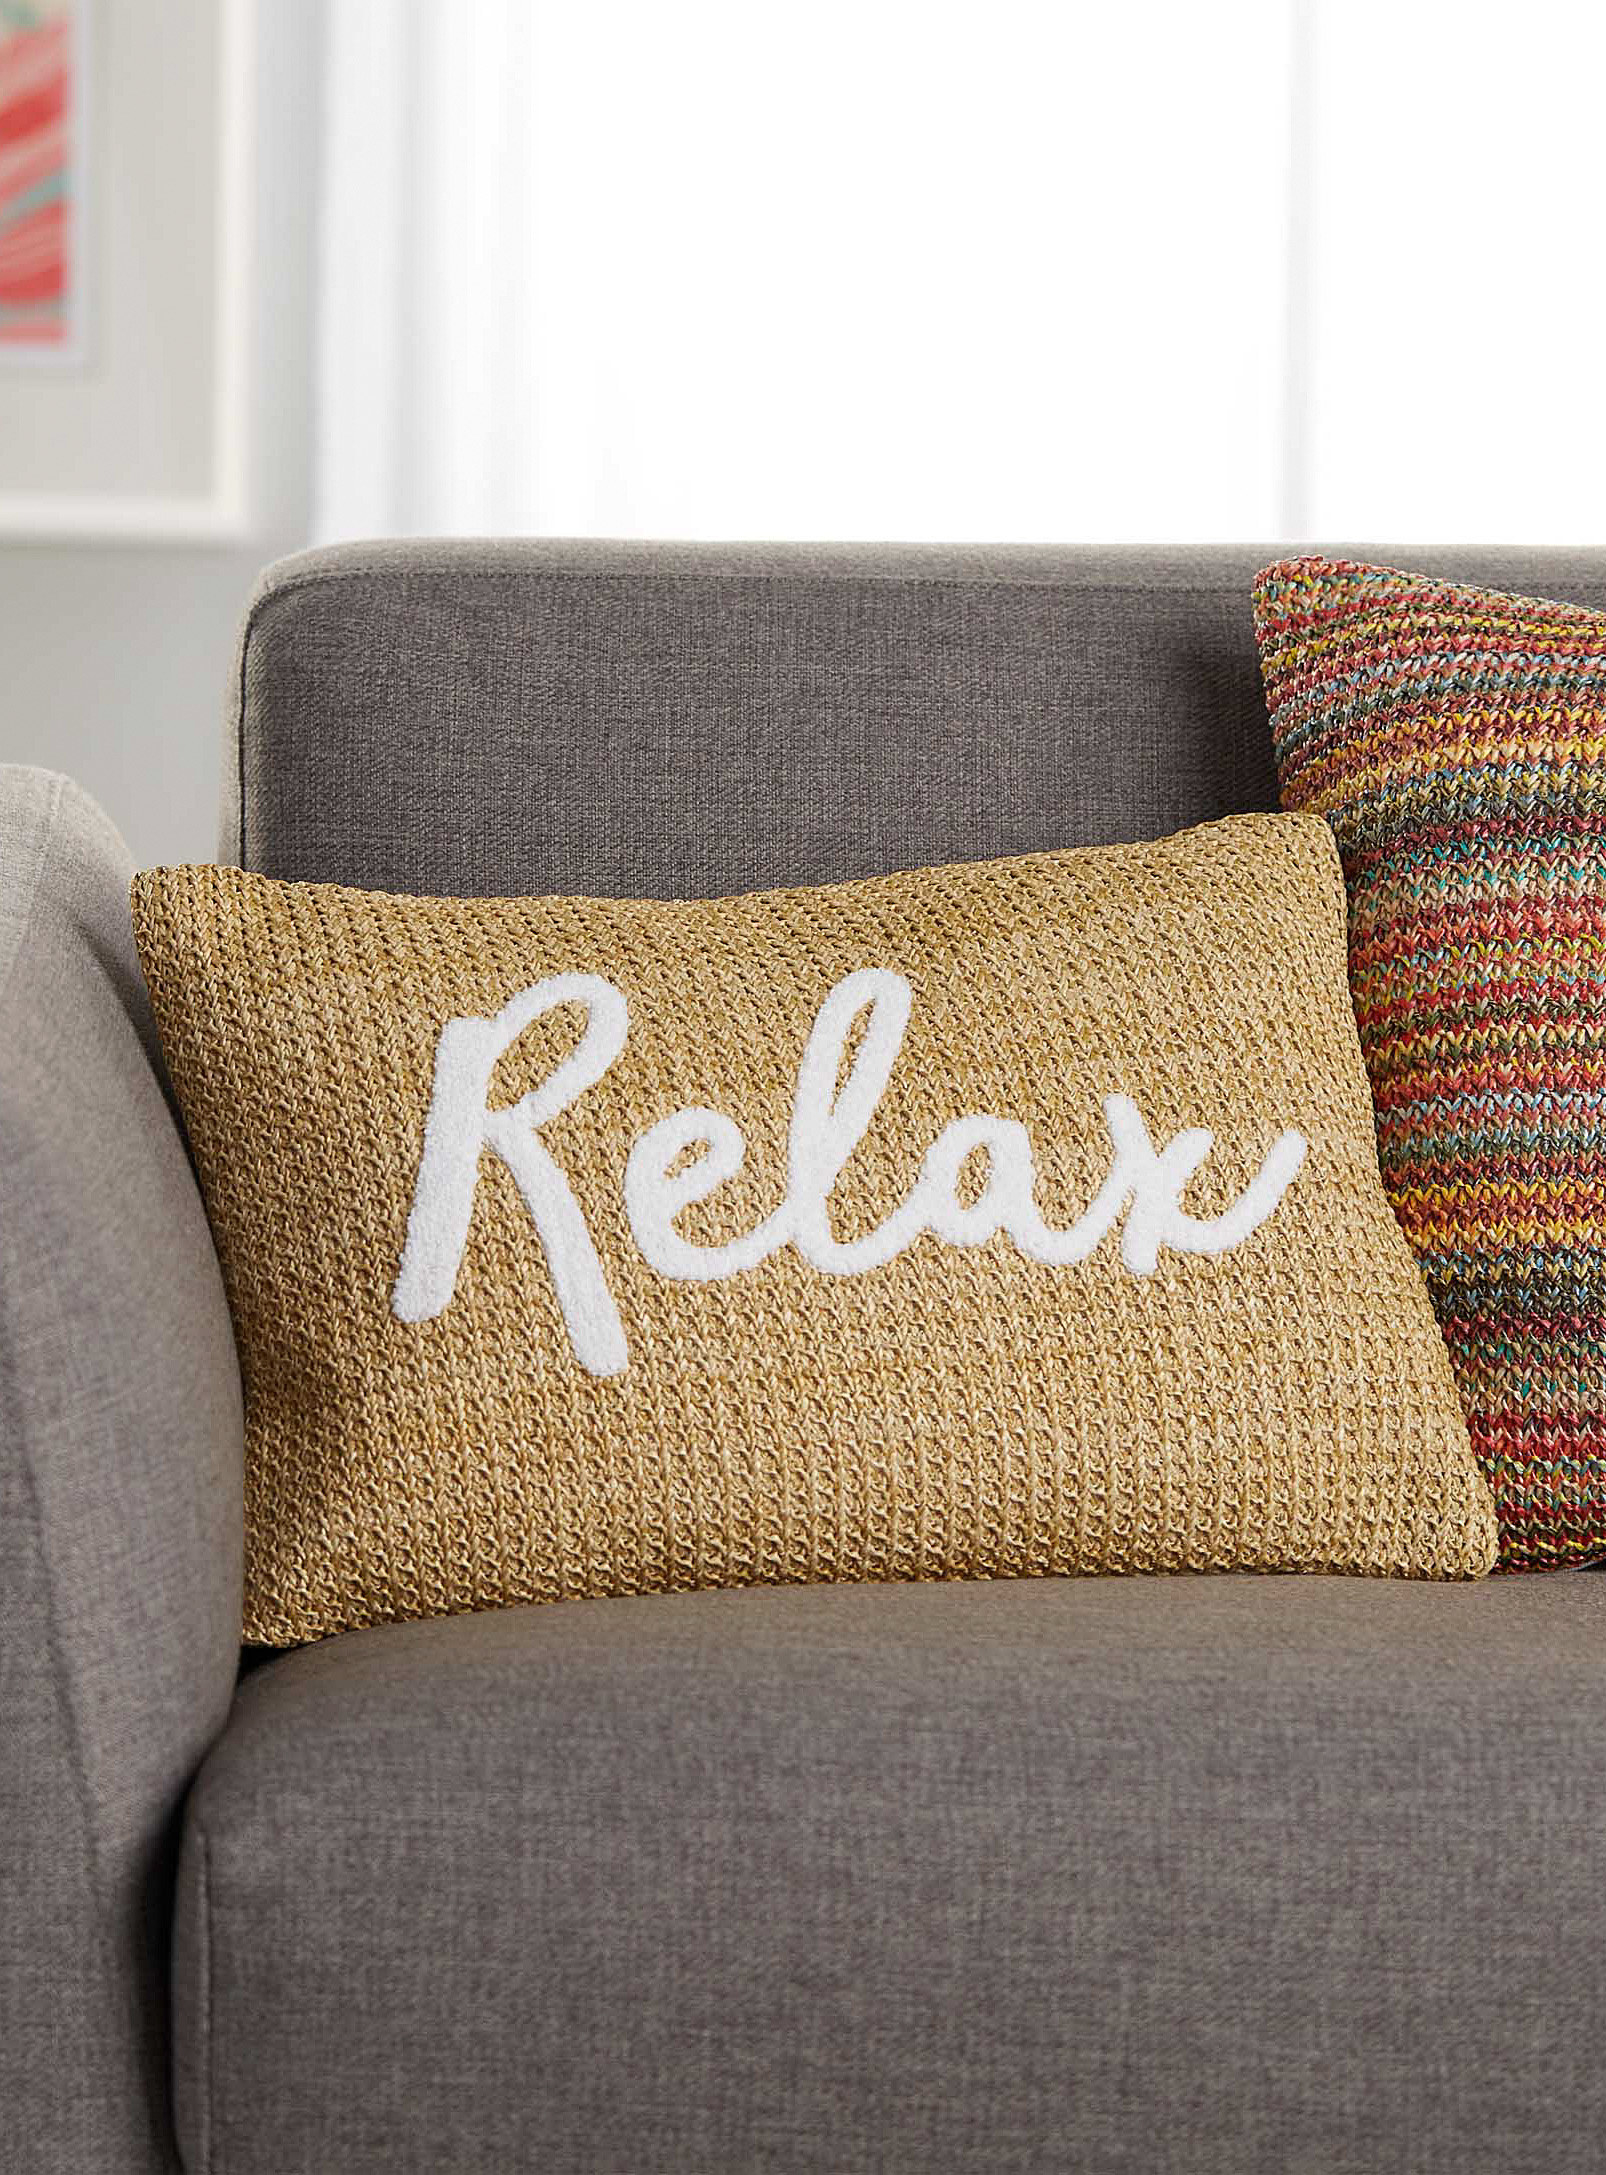 the pillow on a couch that says relax